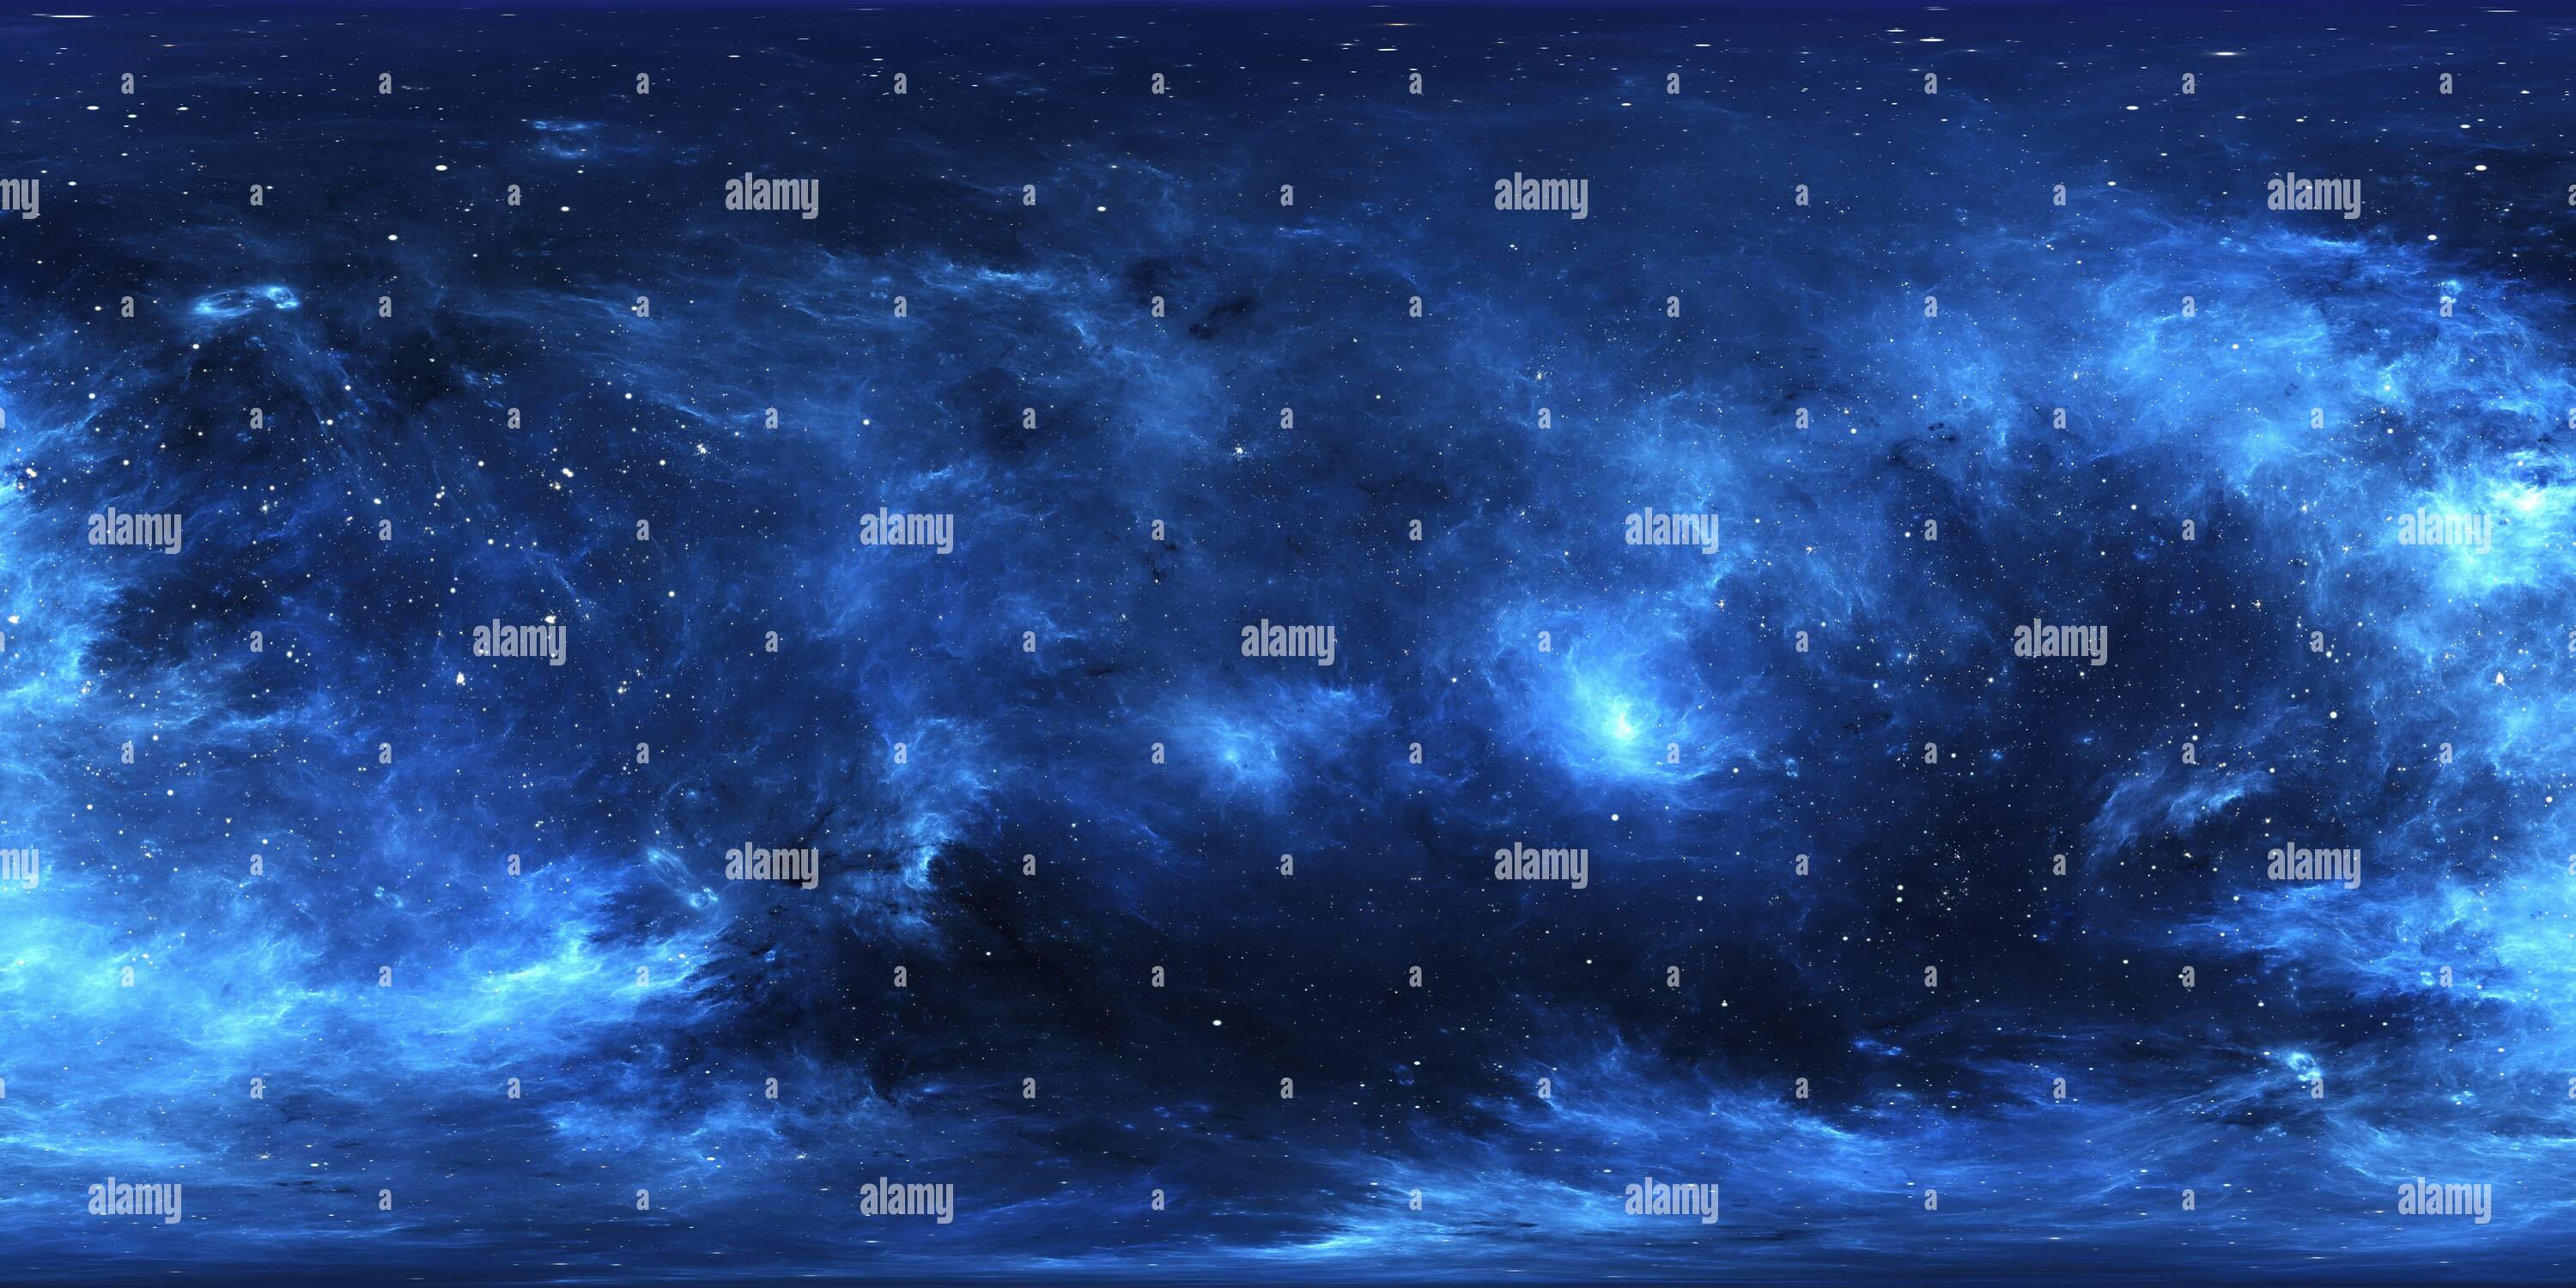 360 degree panoramic view of 360 degree interstellar cloud of dust and gas. Space background with nebula and stars. Glowing nebula. Panorama, environment 360° HDRI map. Equirectan